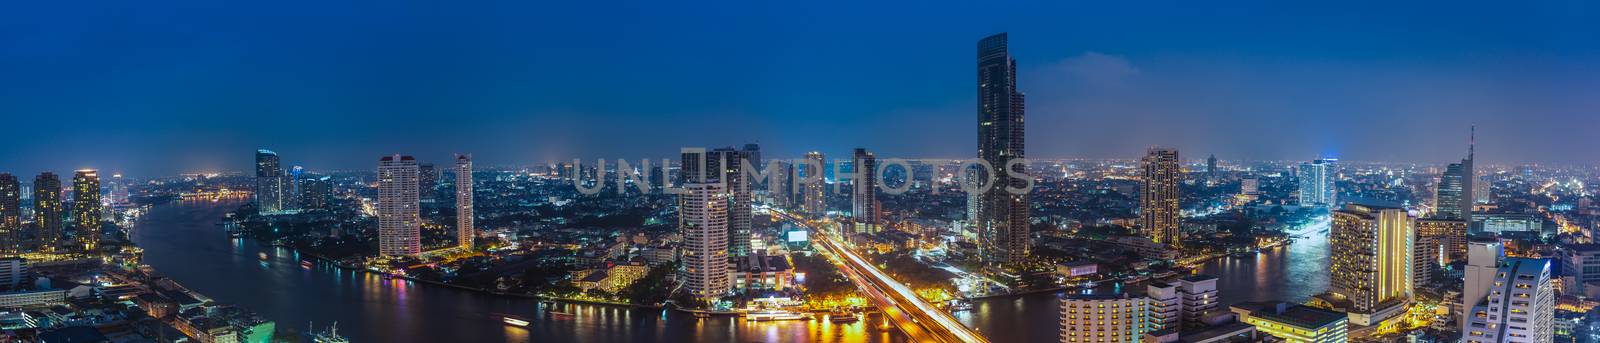 Business Building Bangkok city area at night life with transport by FrameAngel